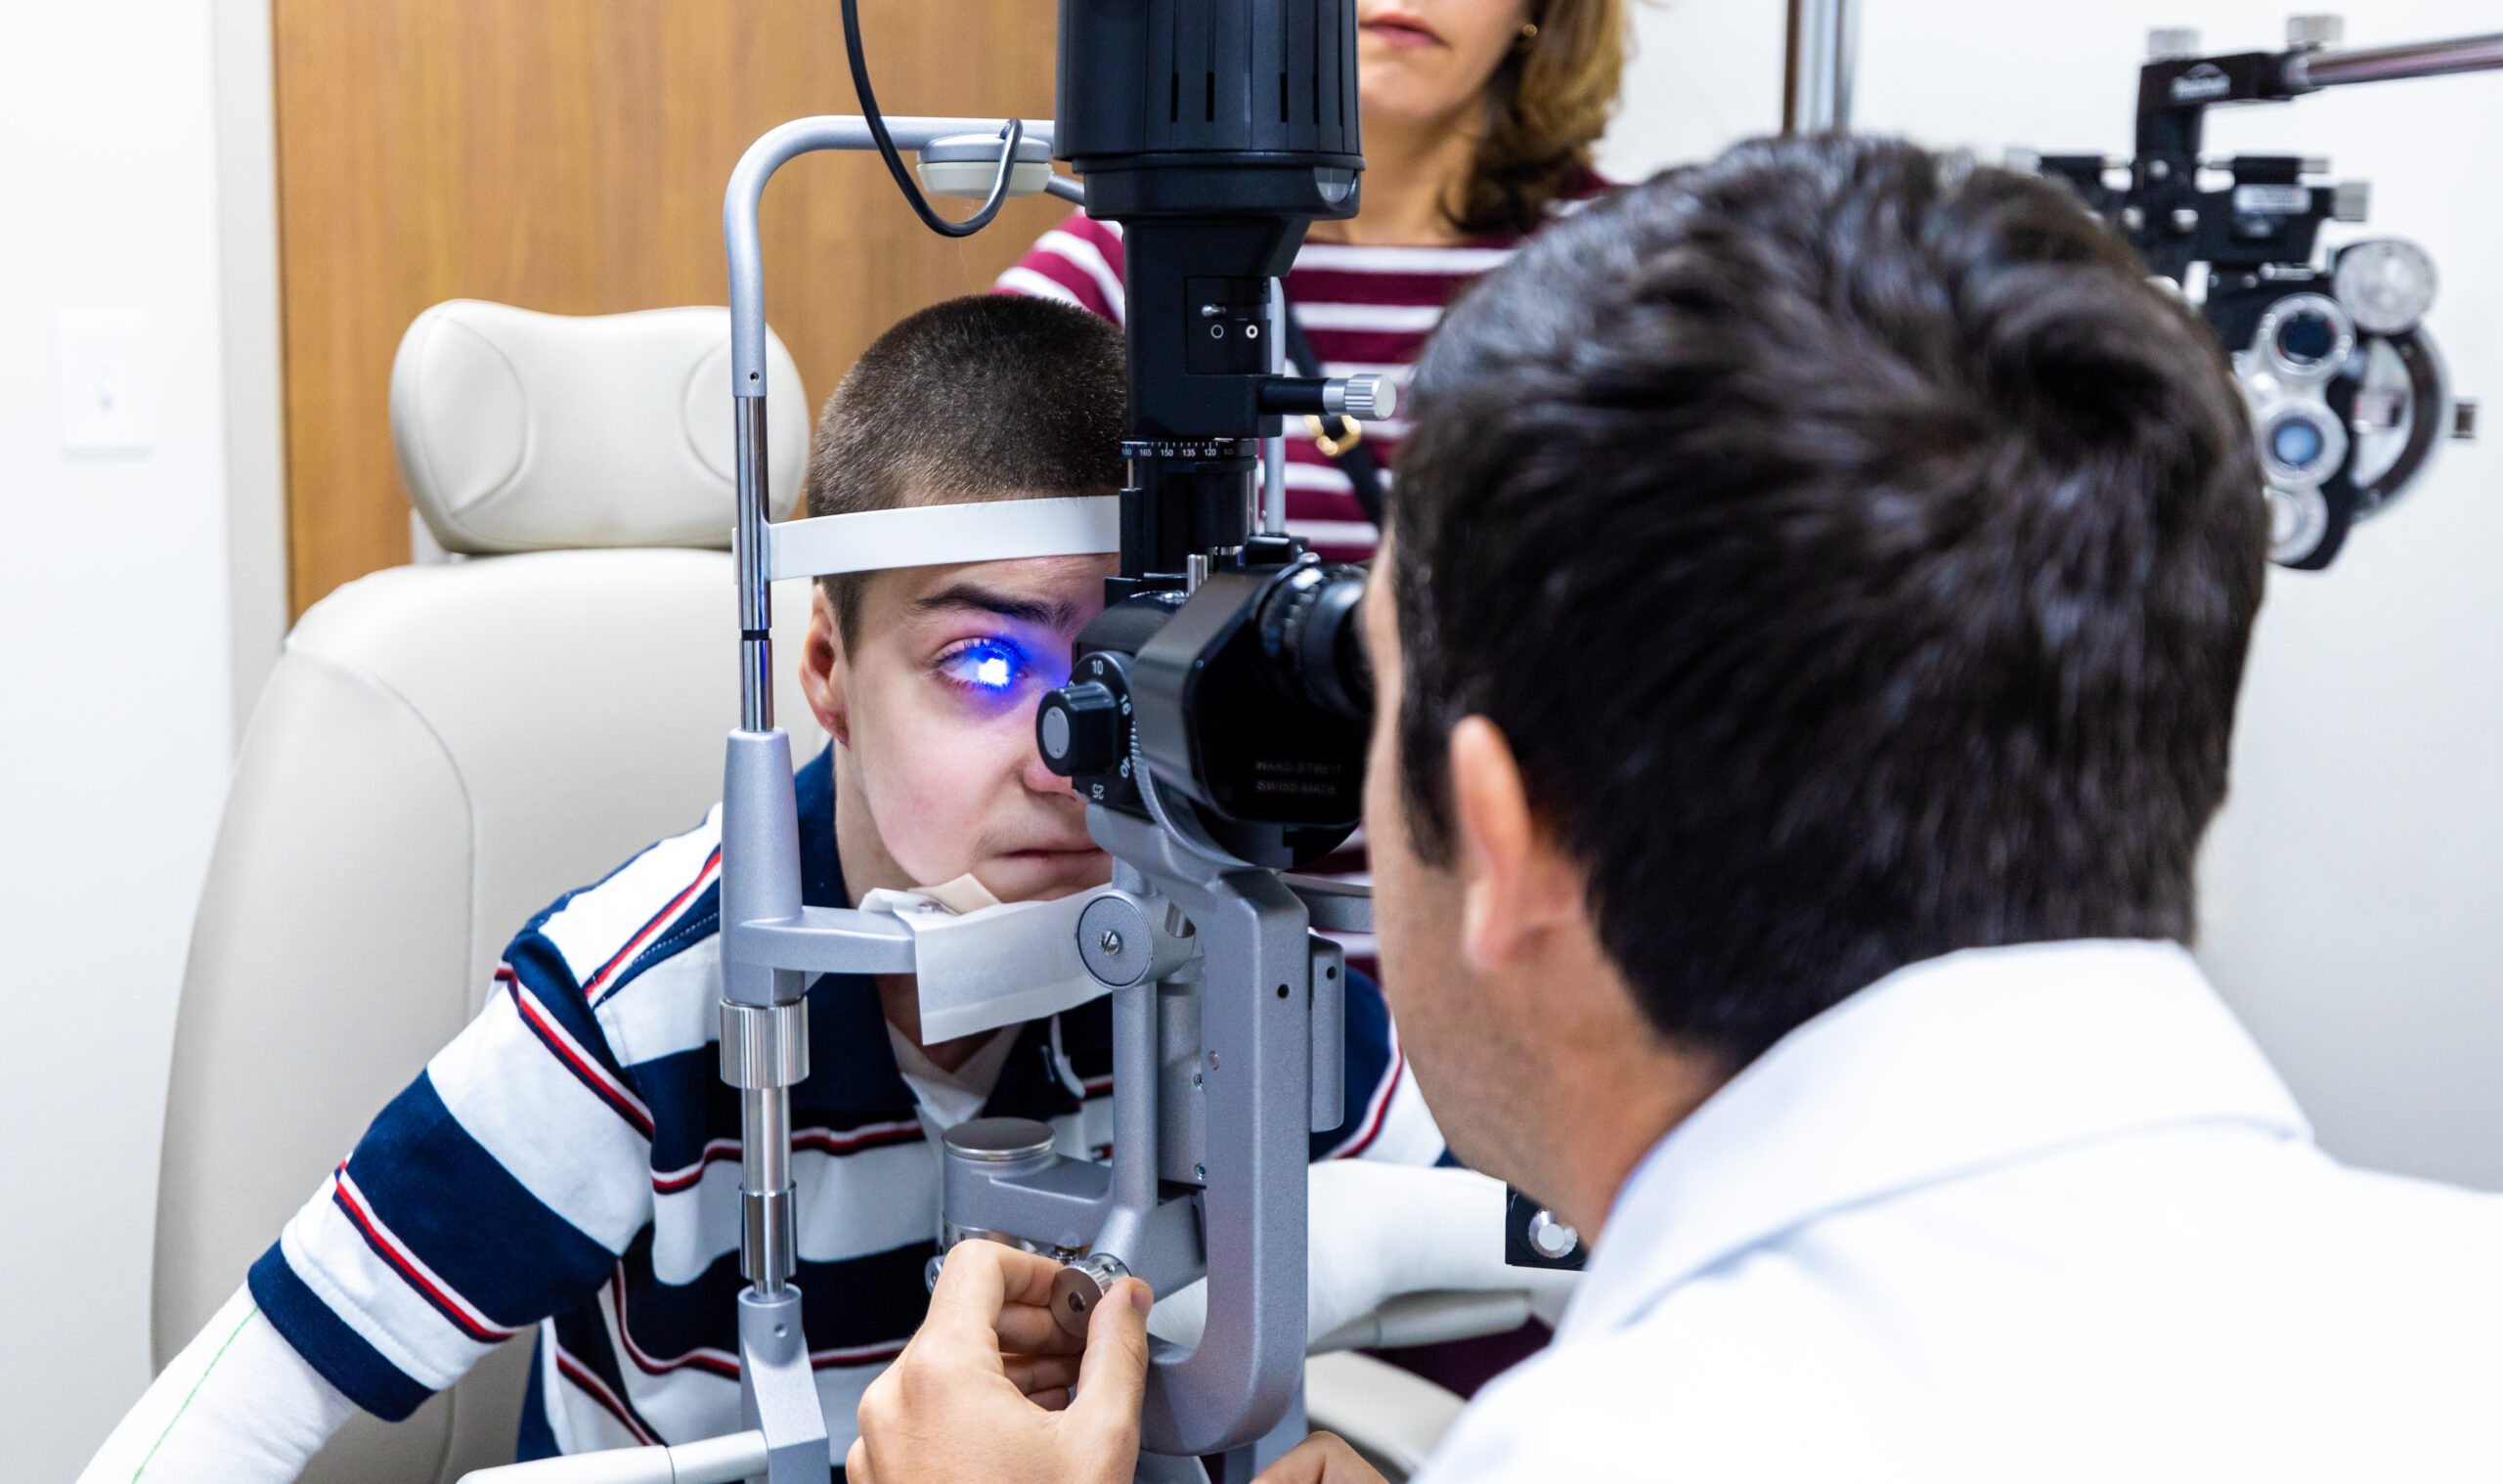 Dr. Sabater inspects Antonio's vision during an eye exam.